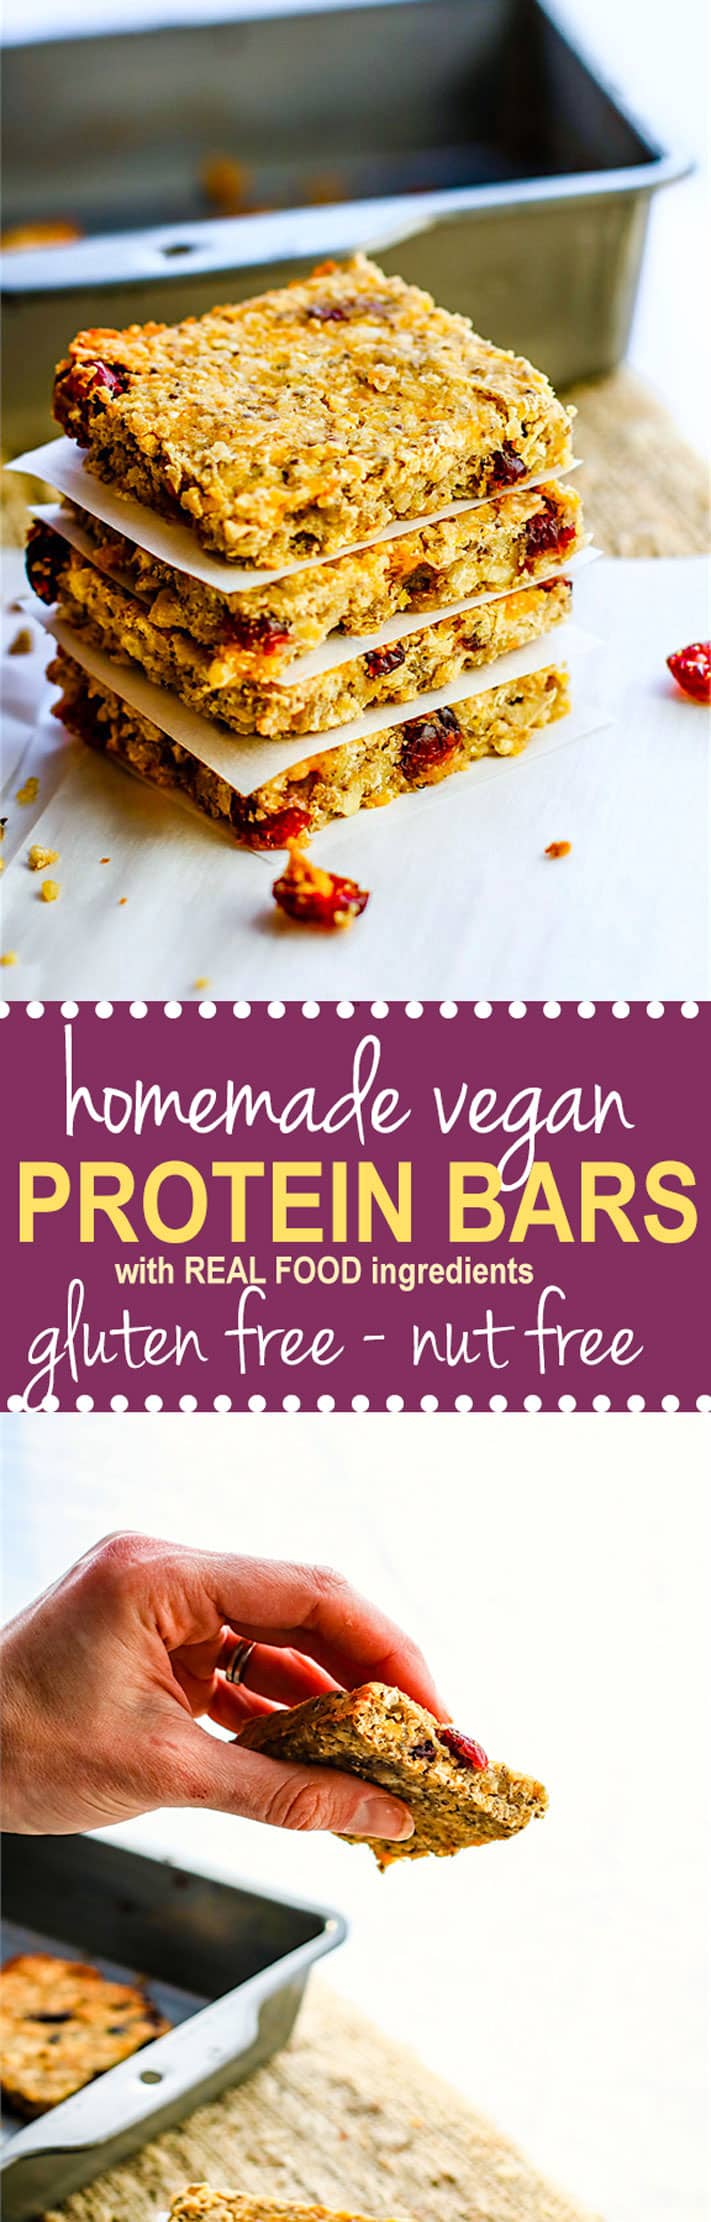 How to Make Homemade Vegan Protein Bars {Gluten Free, Nut Free}. No protein Powder Needed! Gluten free and nut free vegan protein bars made with simple wholesome protein rich ingredients. Delicious and easy to make!